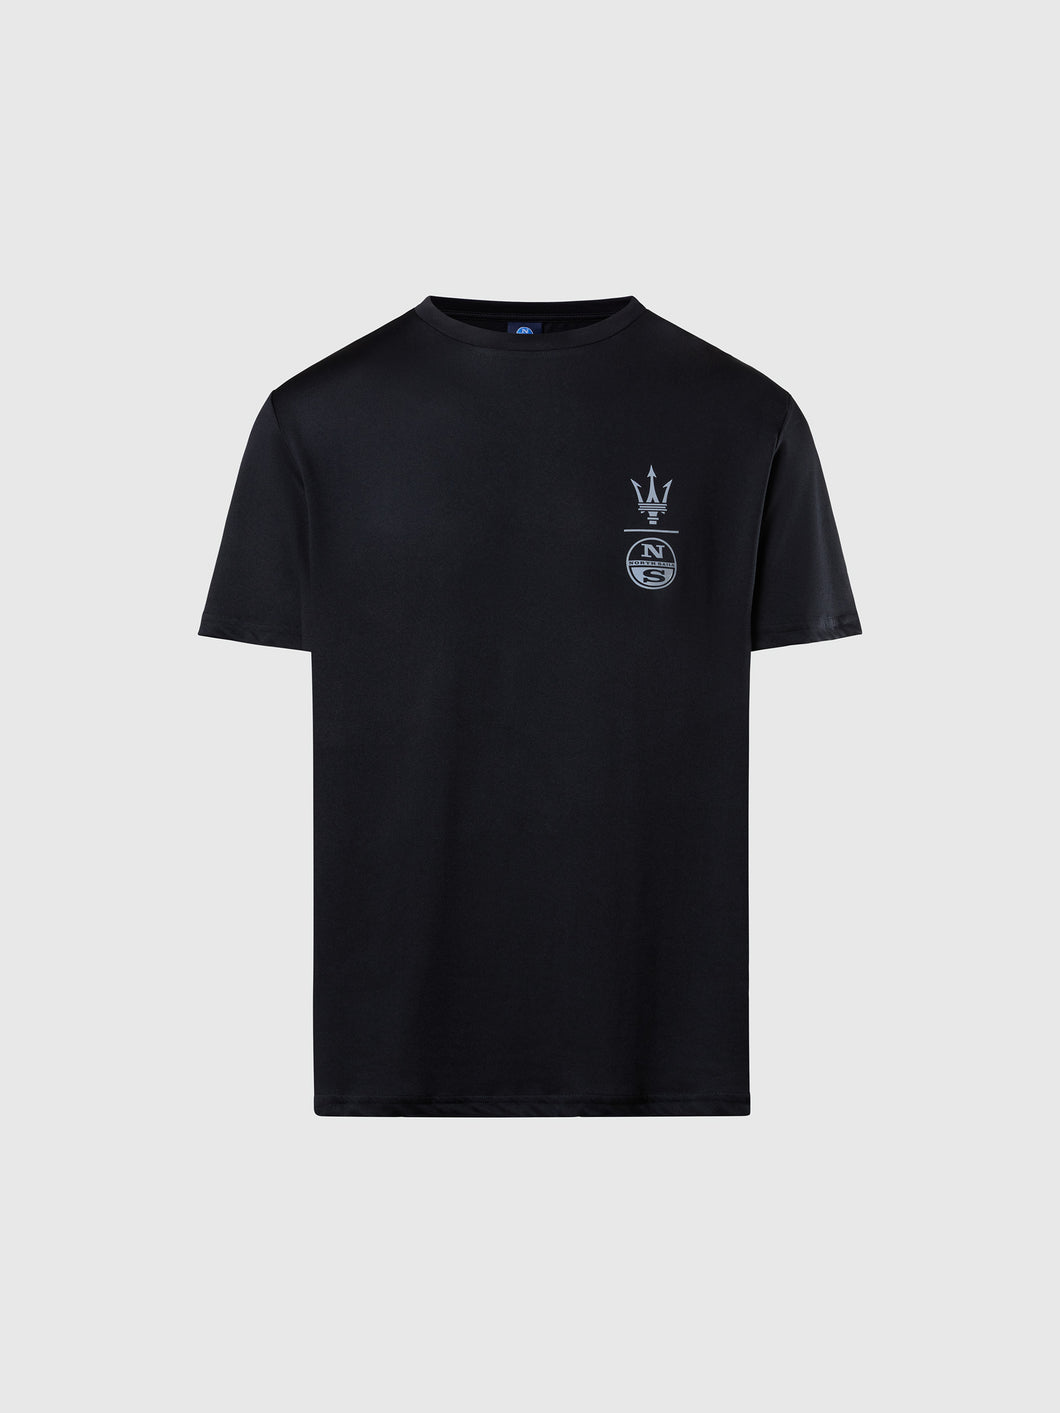 North Sails By Maserati, Black Recycled Jersey T-Shirt